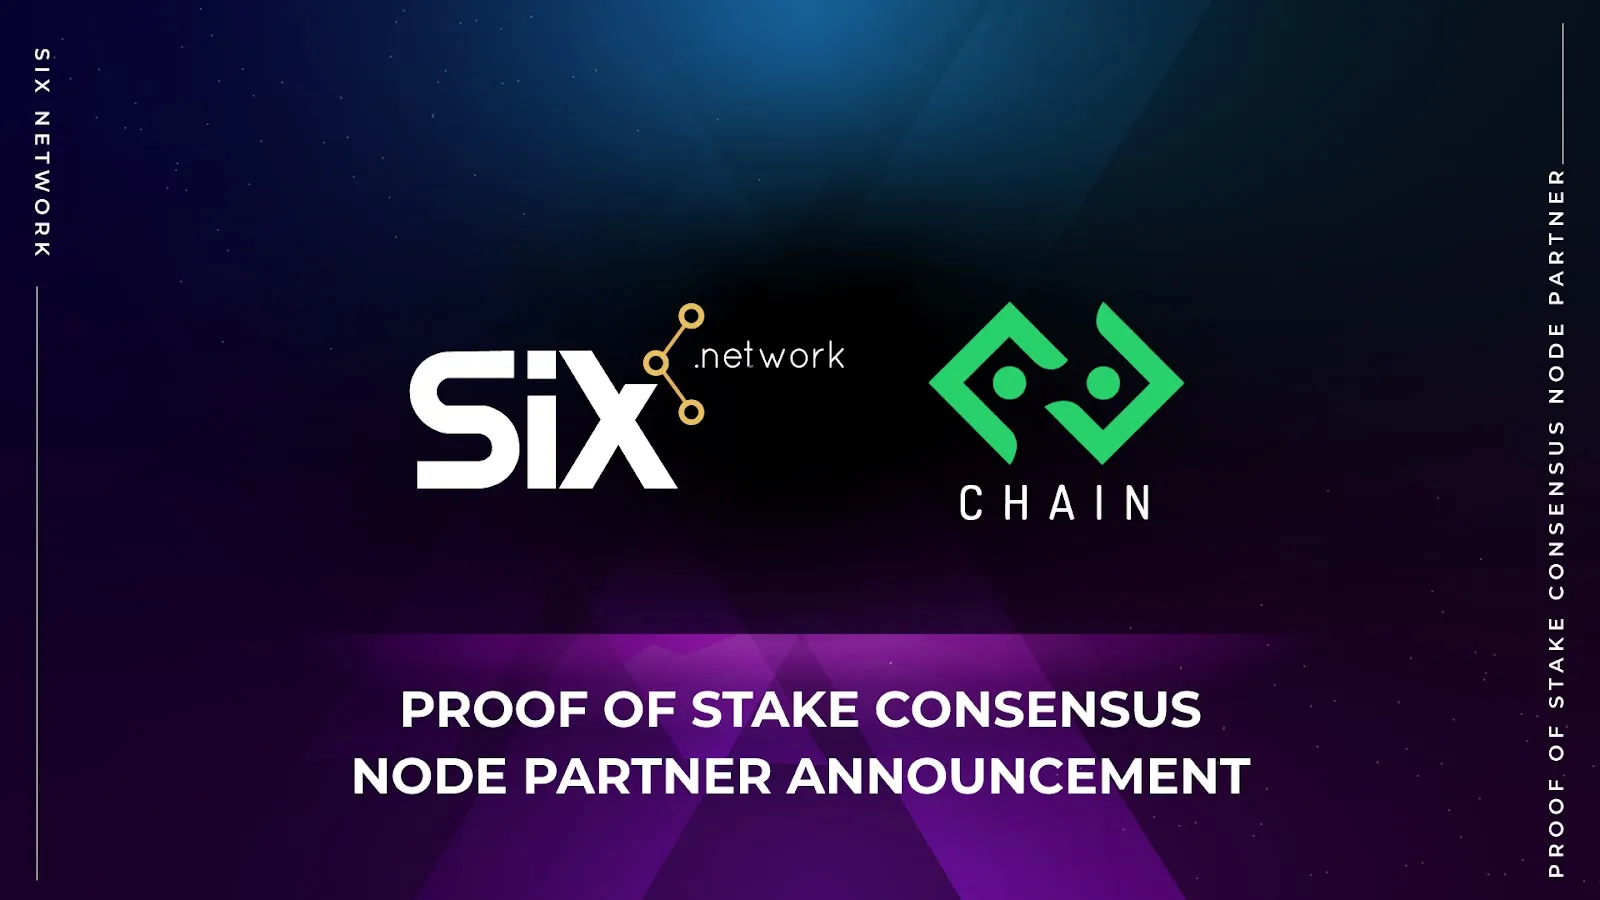 SIX Network Joins Bitkub Chain as a PoS Consensus Node Partner, Strengthening the Future of Blockchain Technology